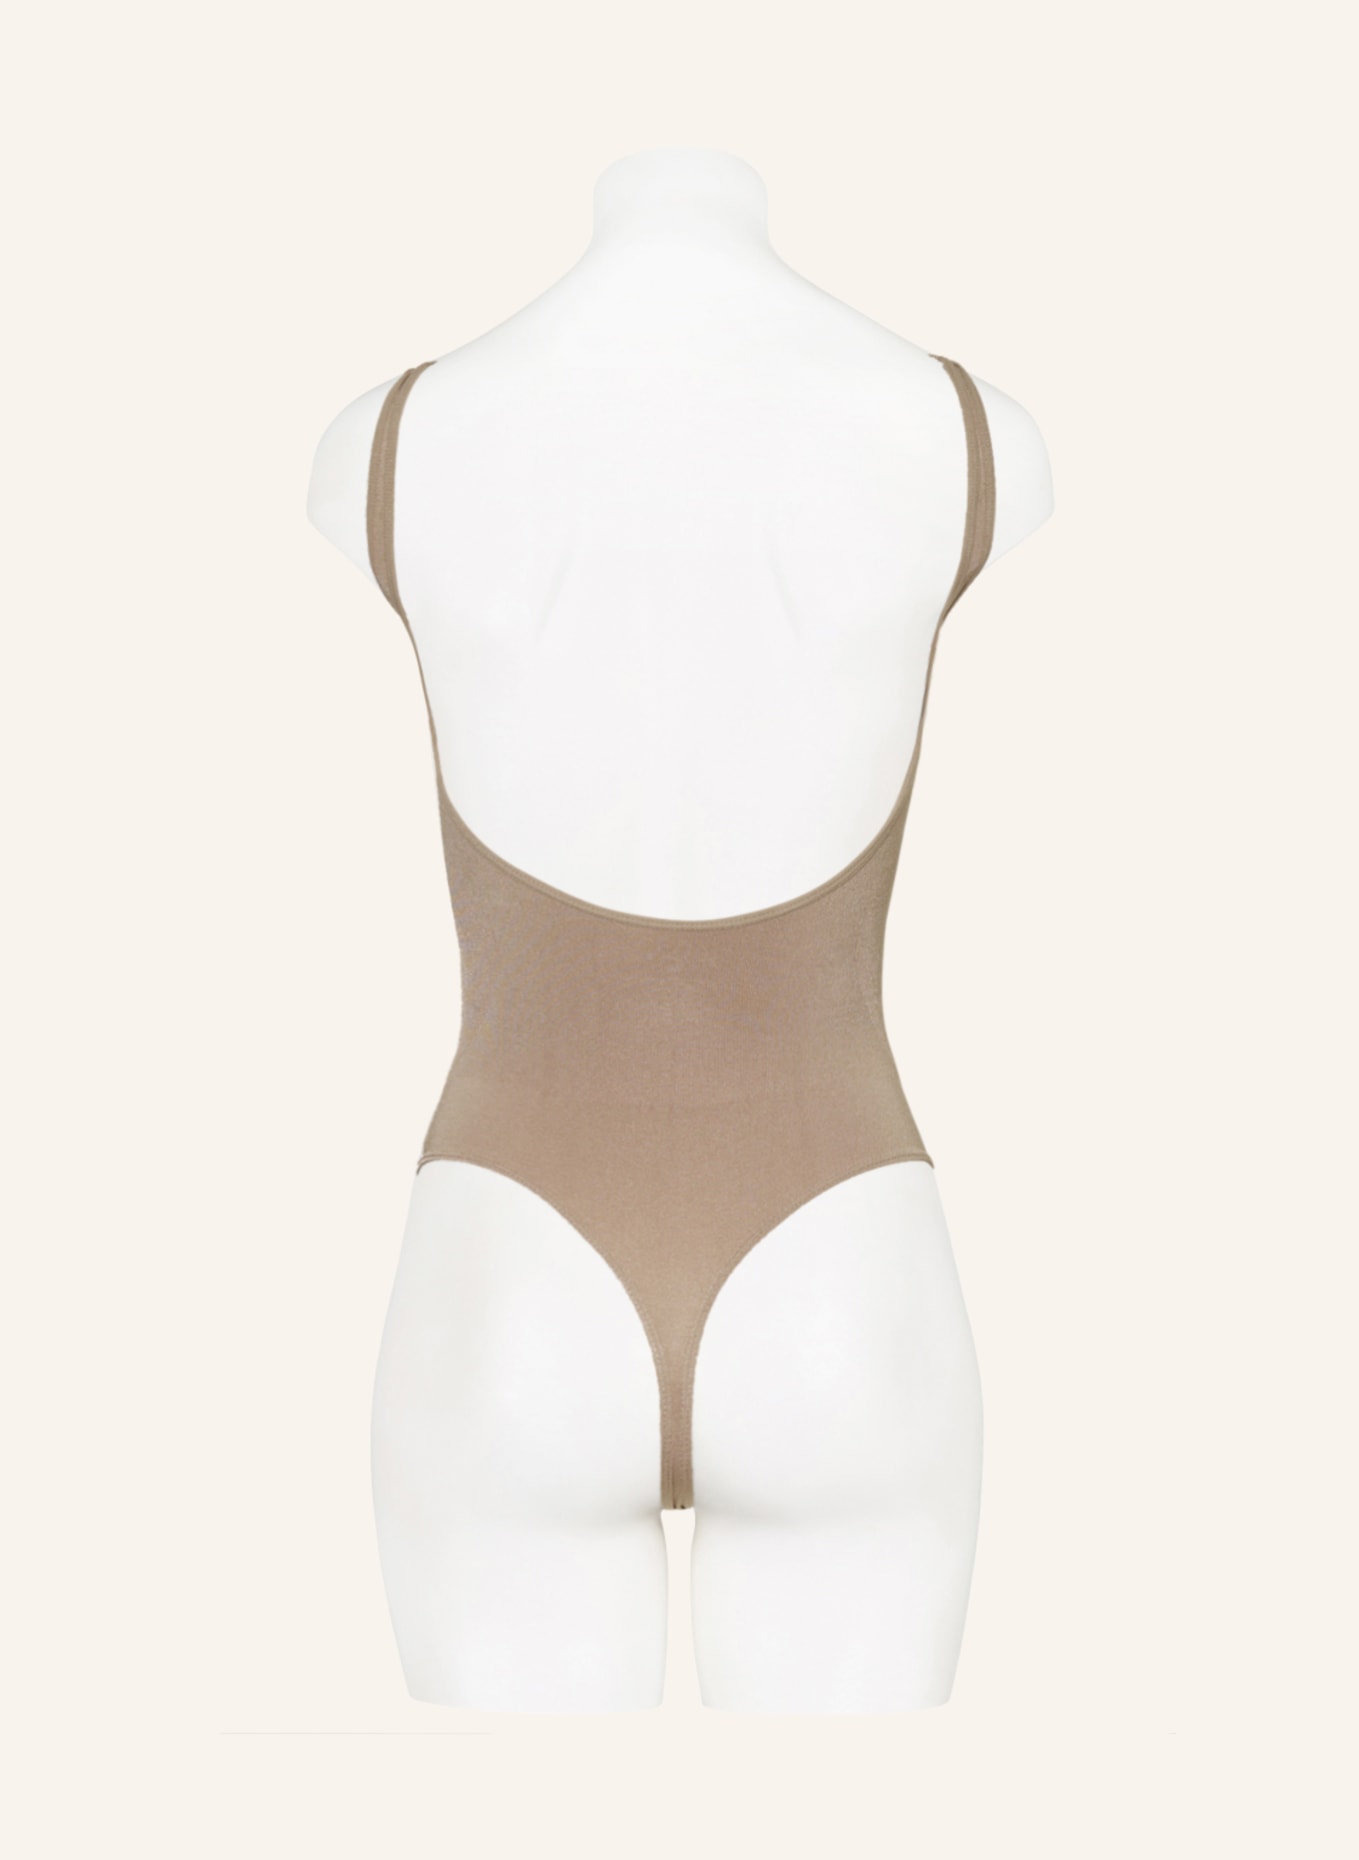 Magic Bodyfashion low back shaping bodysuit with thong detail in